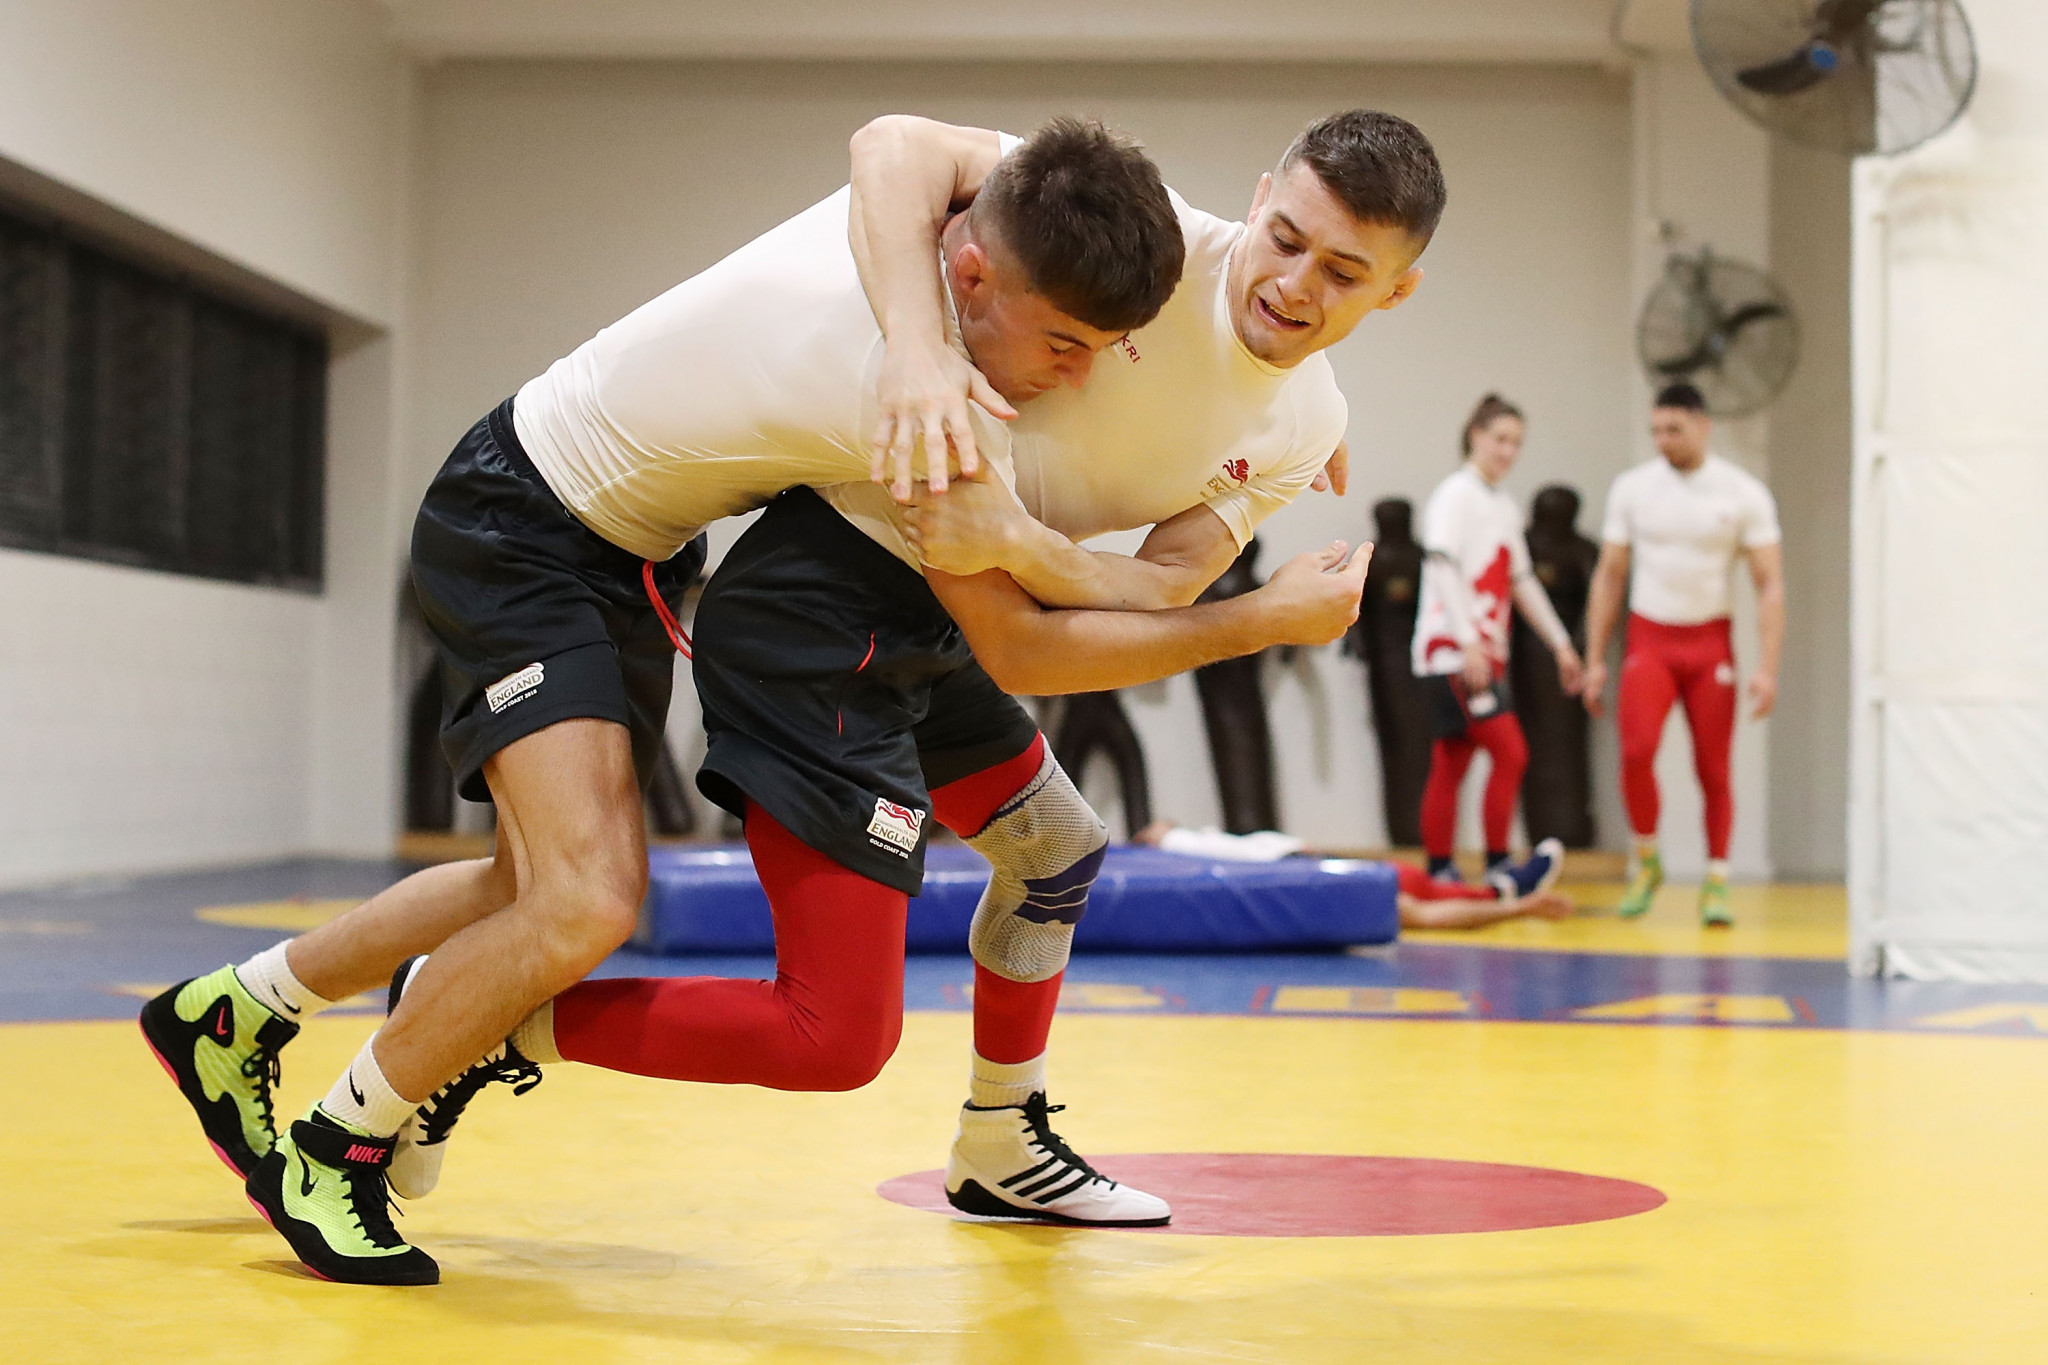 English wrestlers were among others to train before competition begins ©Getty Images